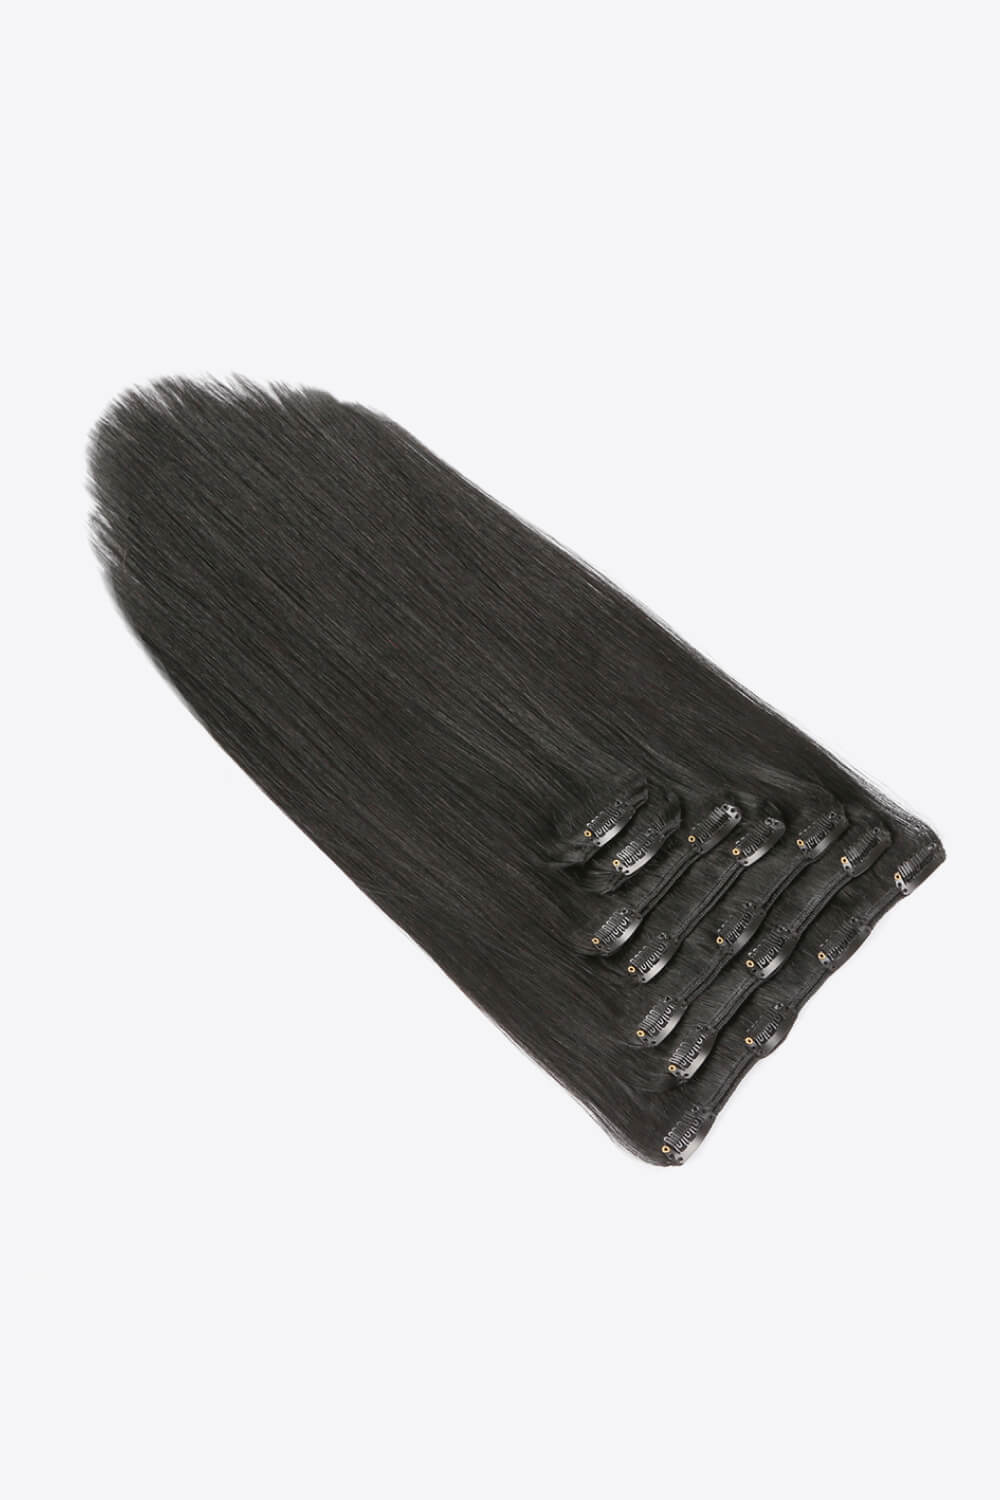 20" 100g Clip-in Hair Extensions Indian Human Hair